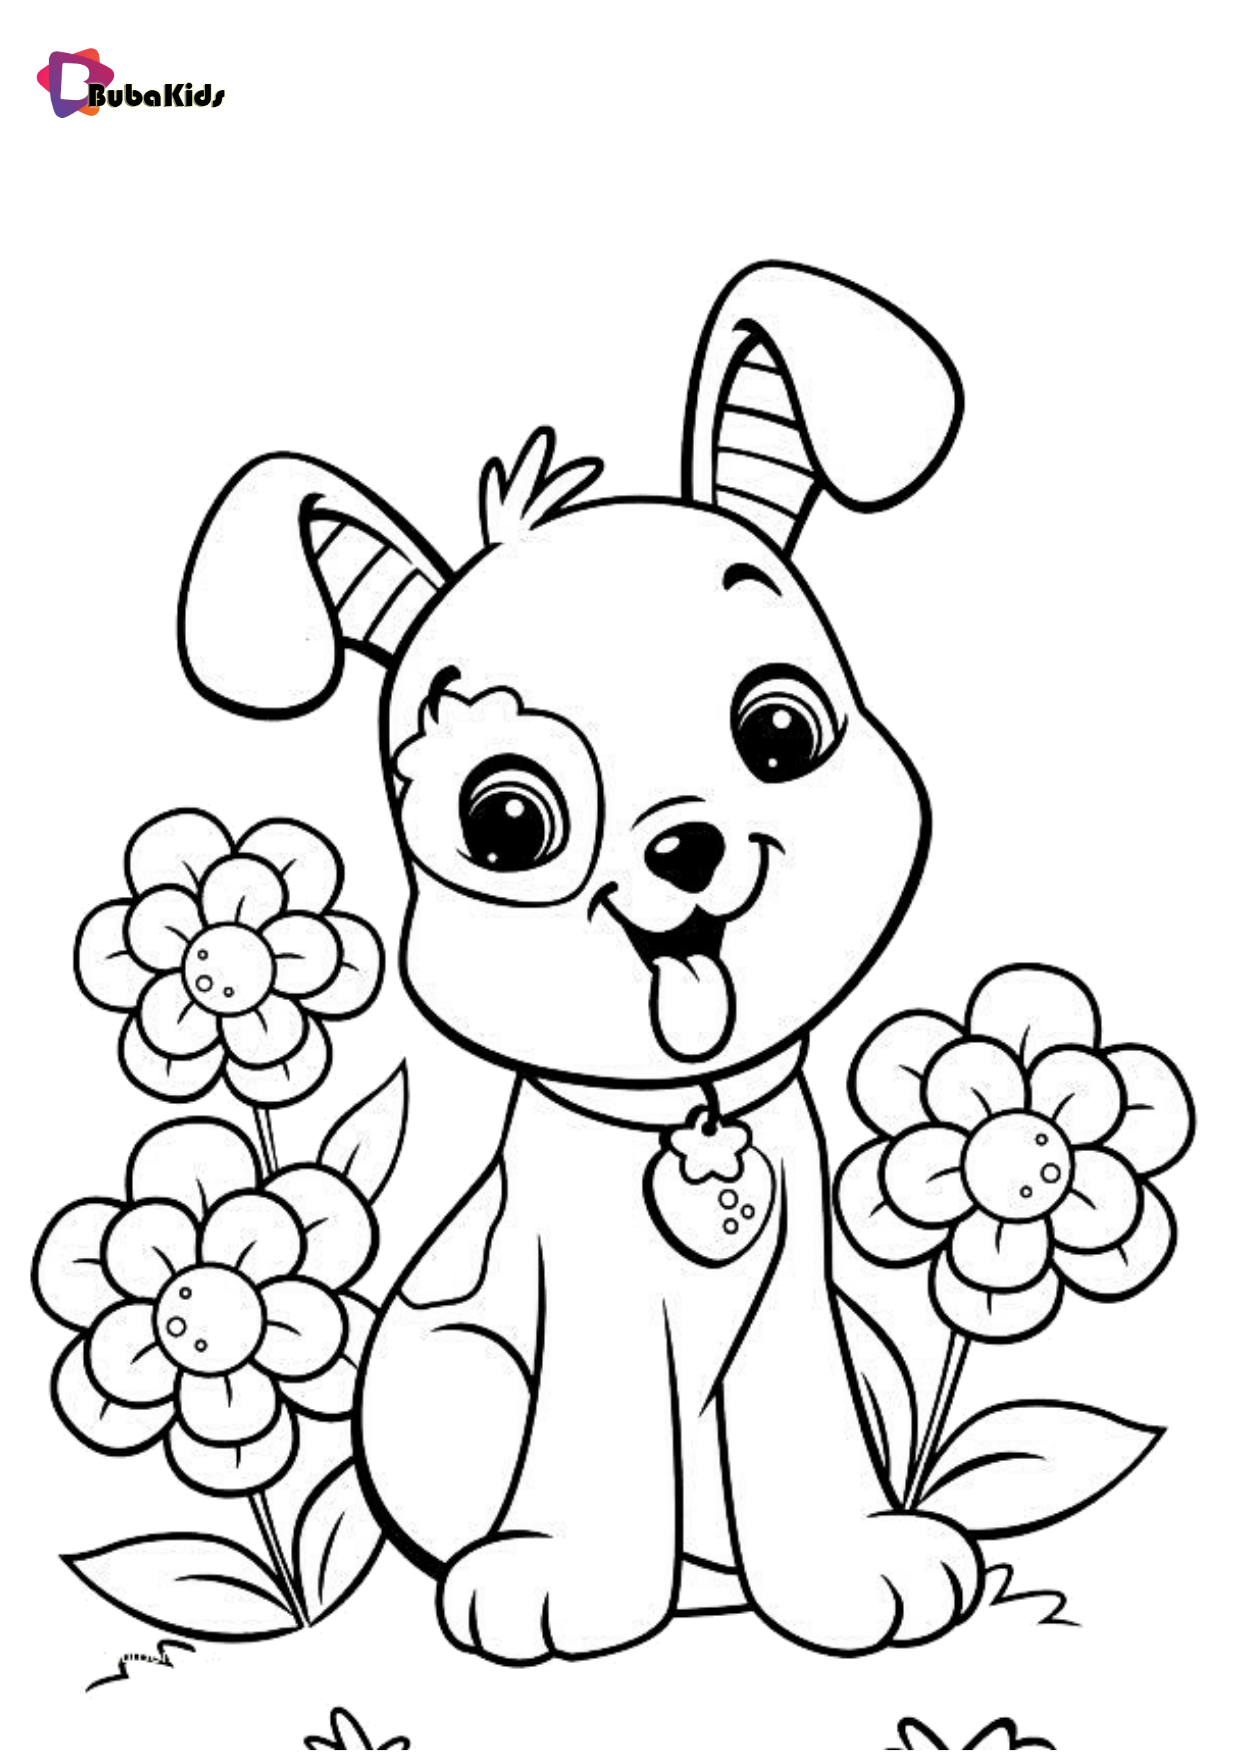 Cute puppy dog animal pet coloring pages Wallpaper